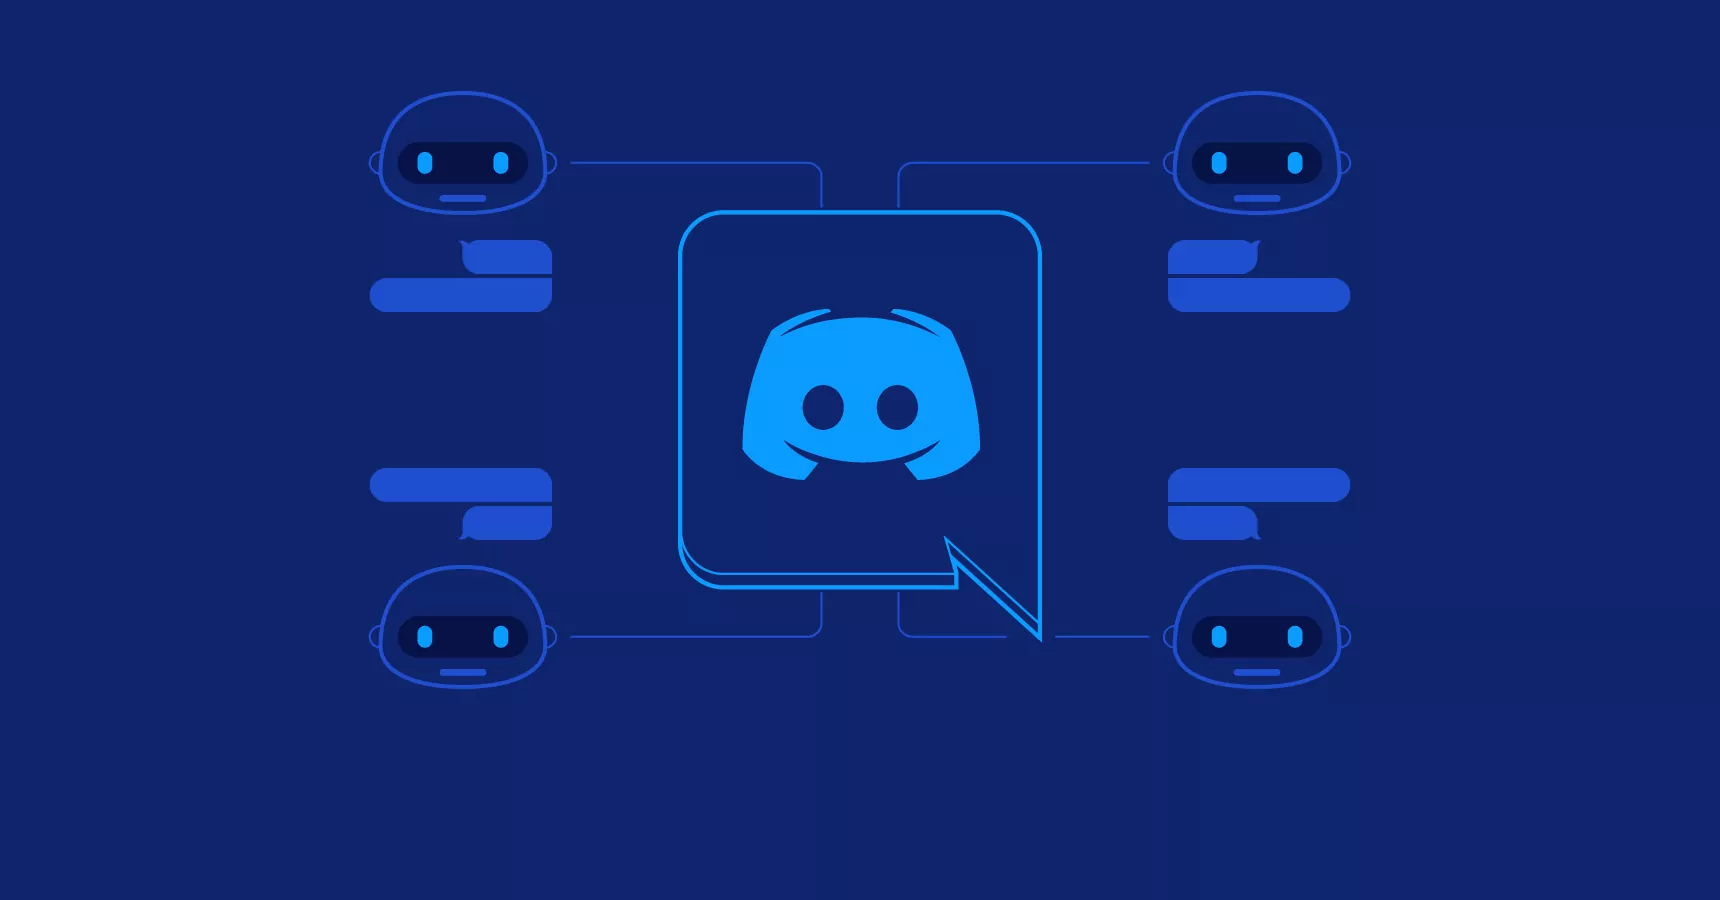 How To Use Laifu Bot Discord | All You Need To Know